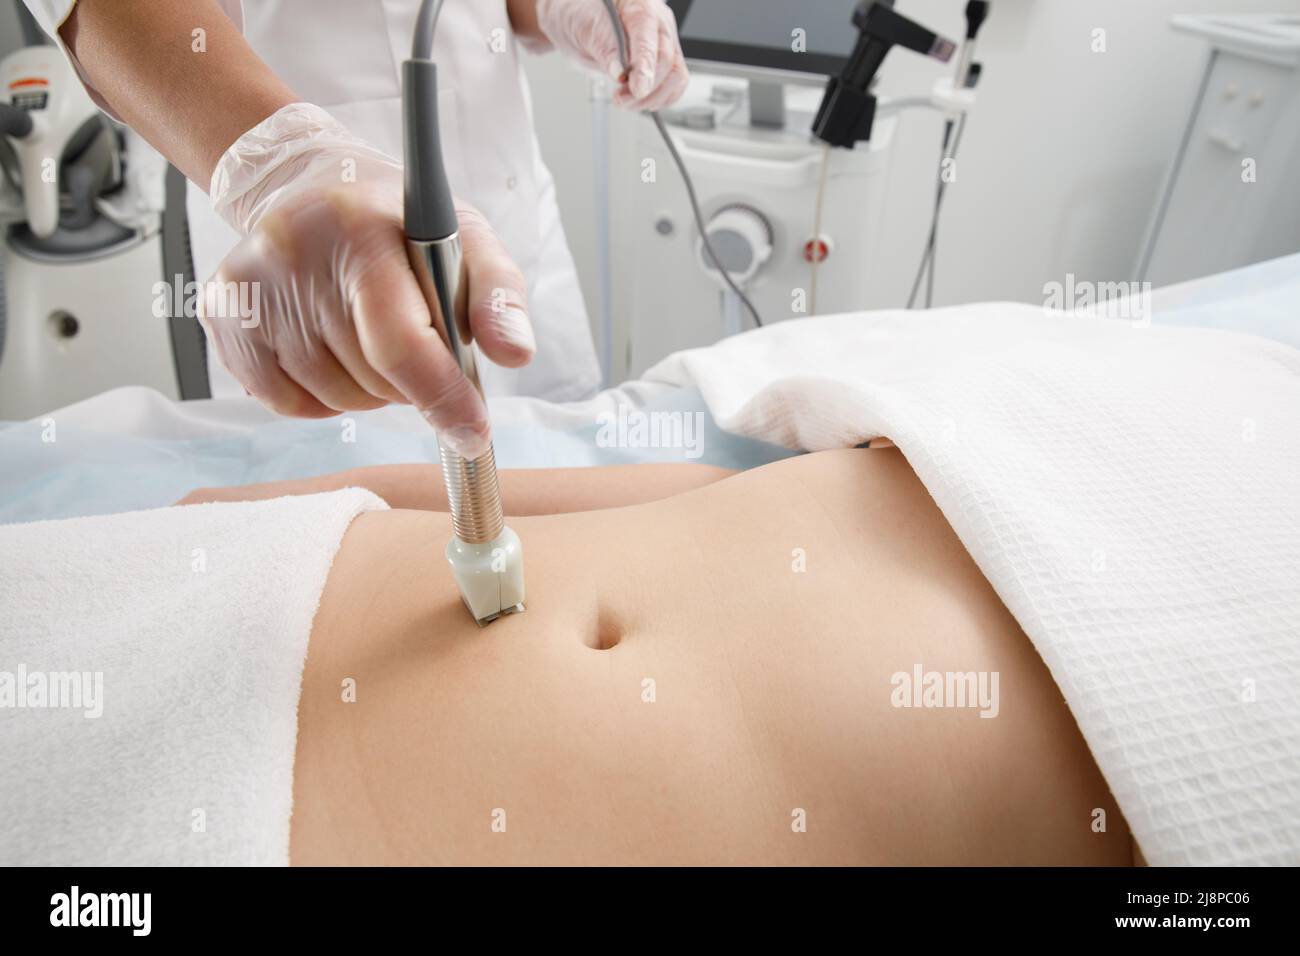 A woman undergoes an anti-cellulite procedure in a cosmetology clinic. Stock Photo